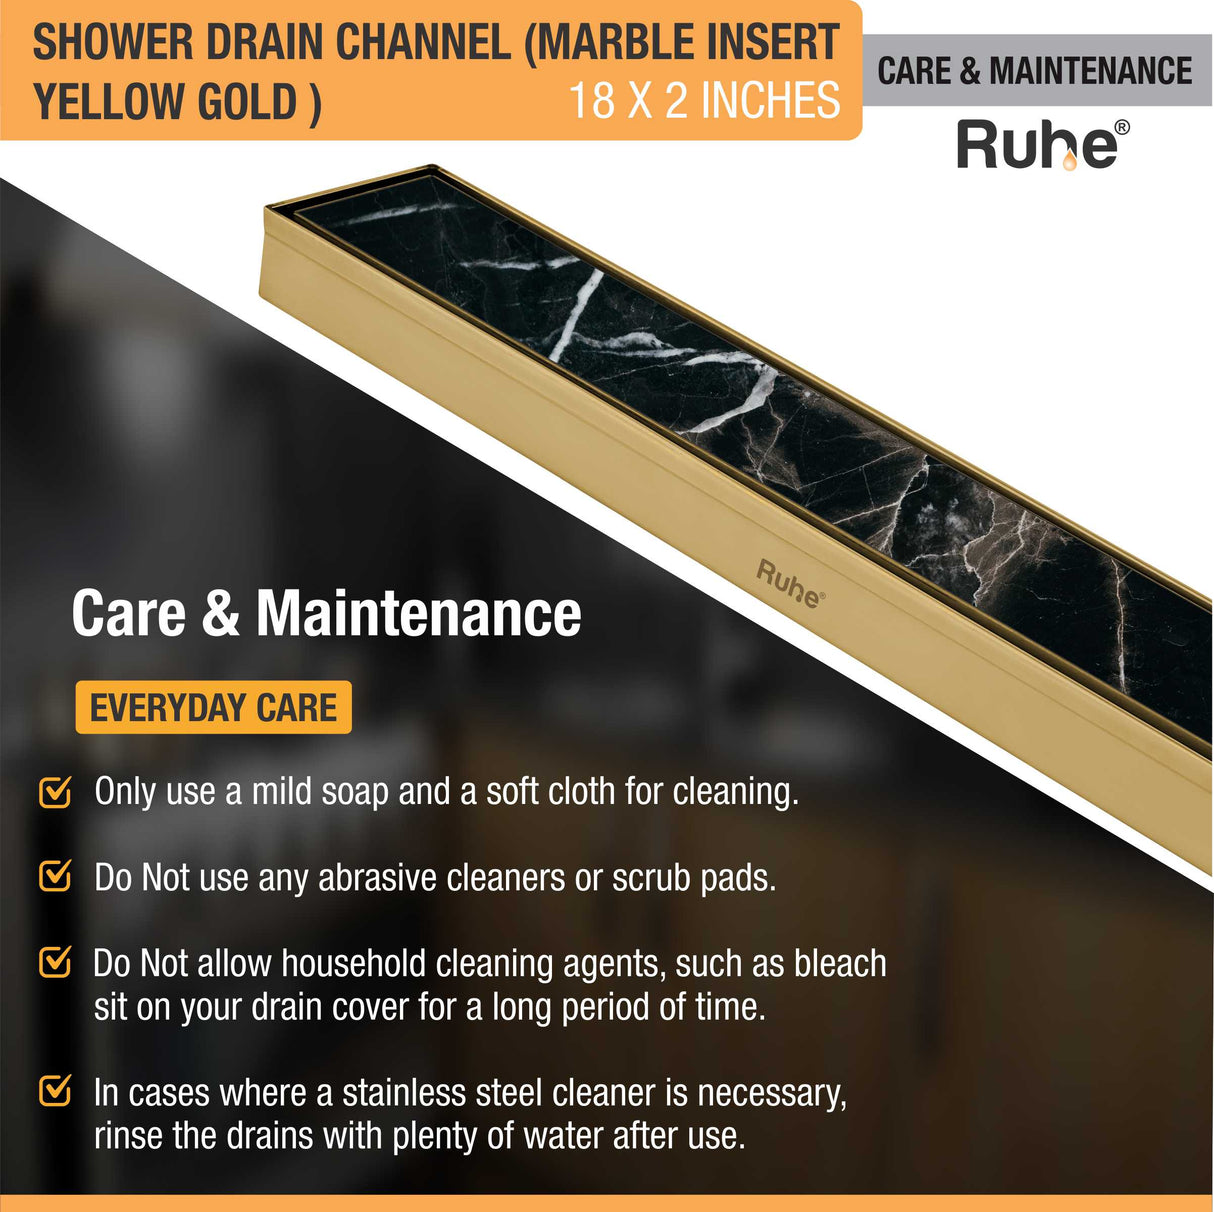 Marble Insert Shower Drain Channel (18 x 2 Inches) YELLOW GOLD care and maintenance